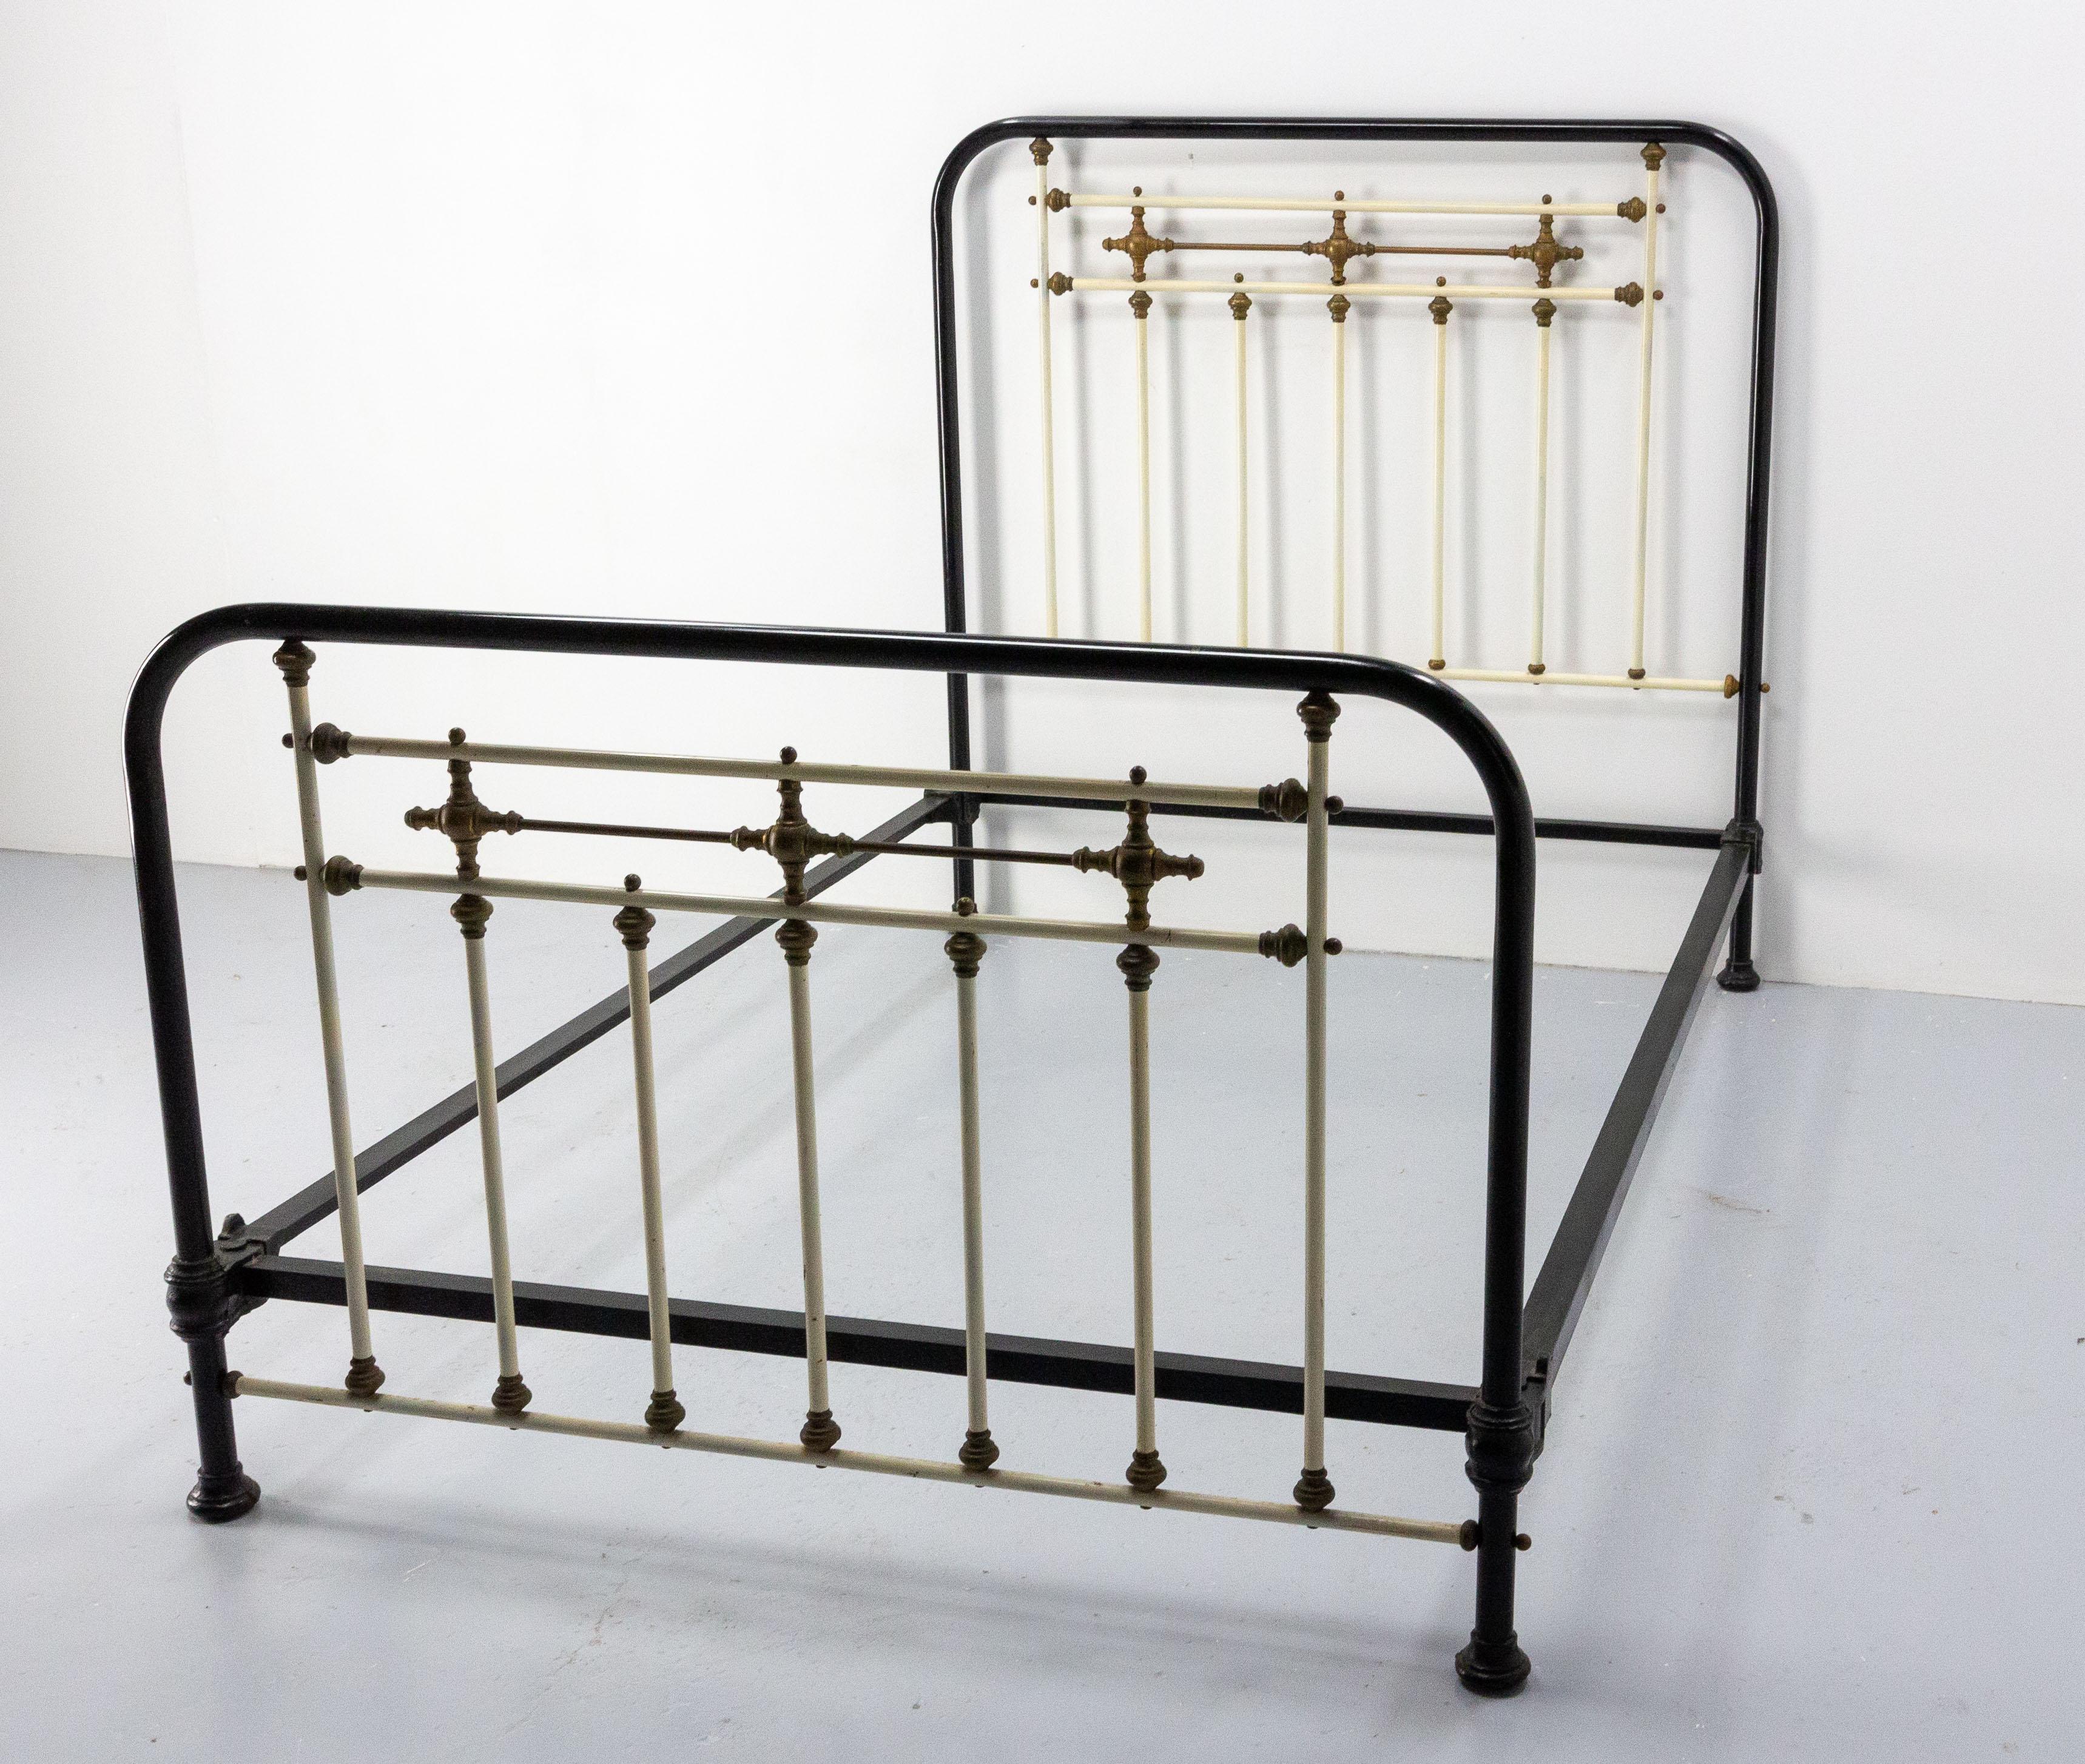 Early 20th Century French Art Deco Metal Single Bed, circa 1920 For Sale